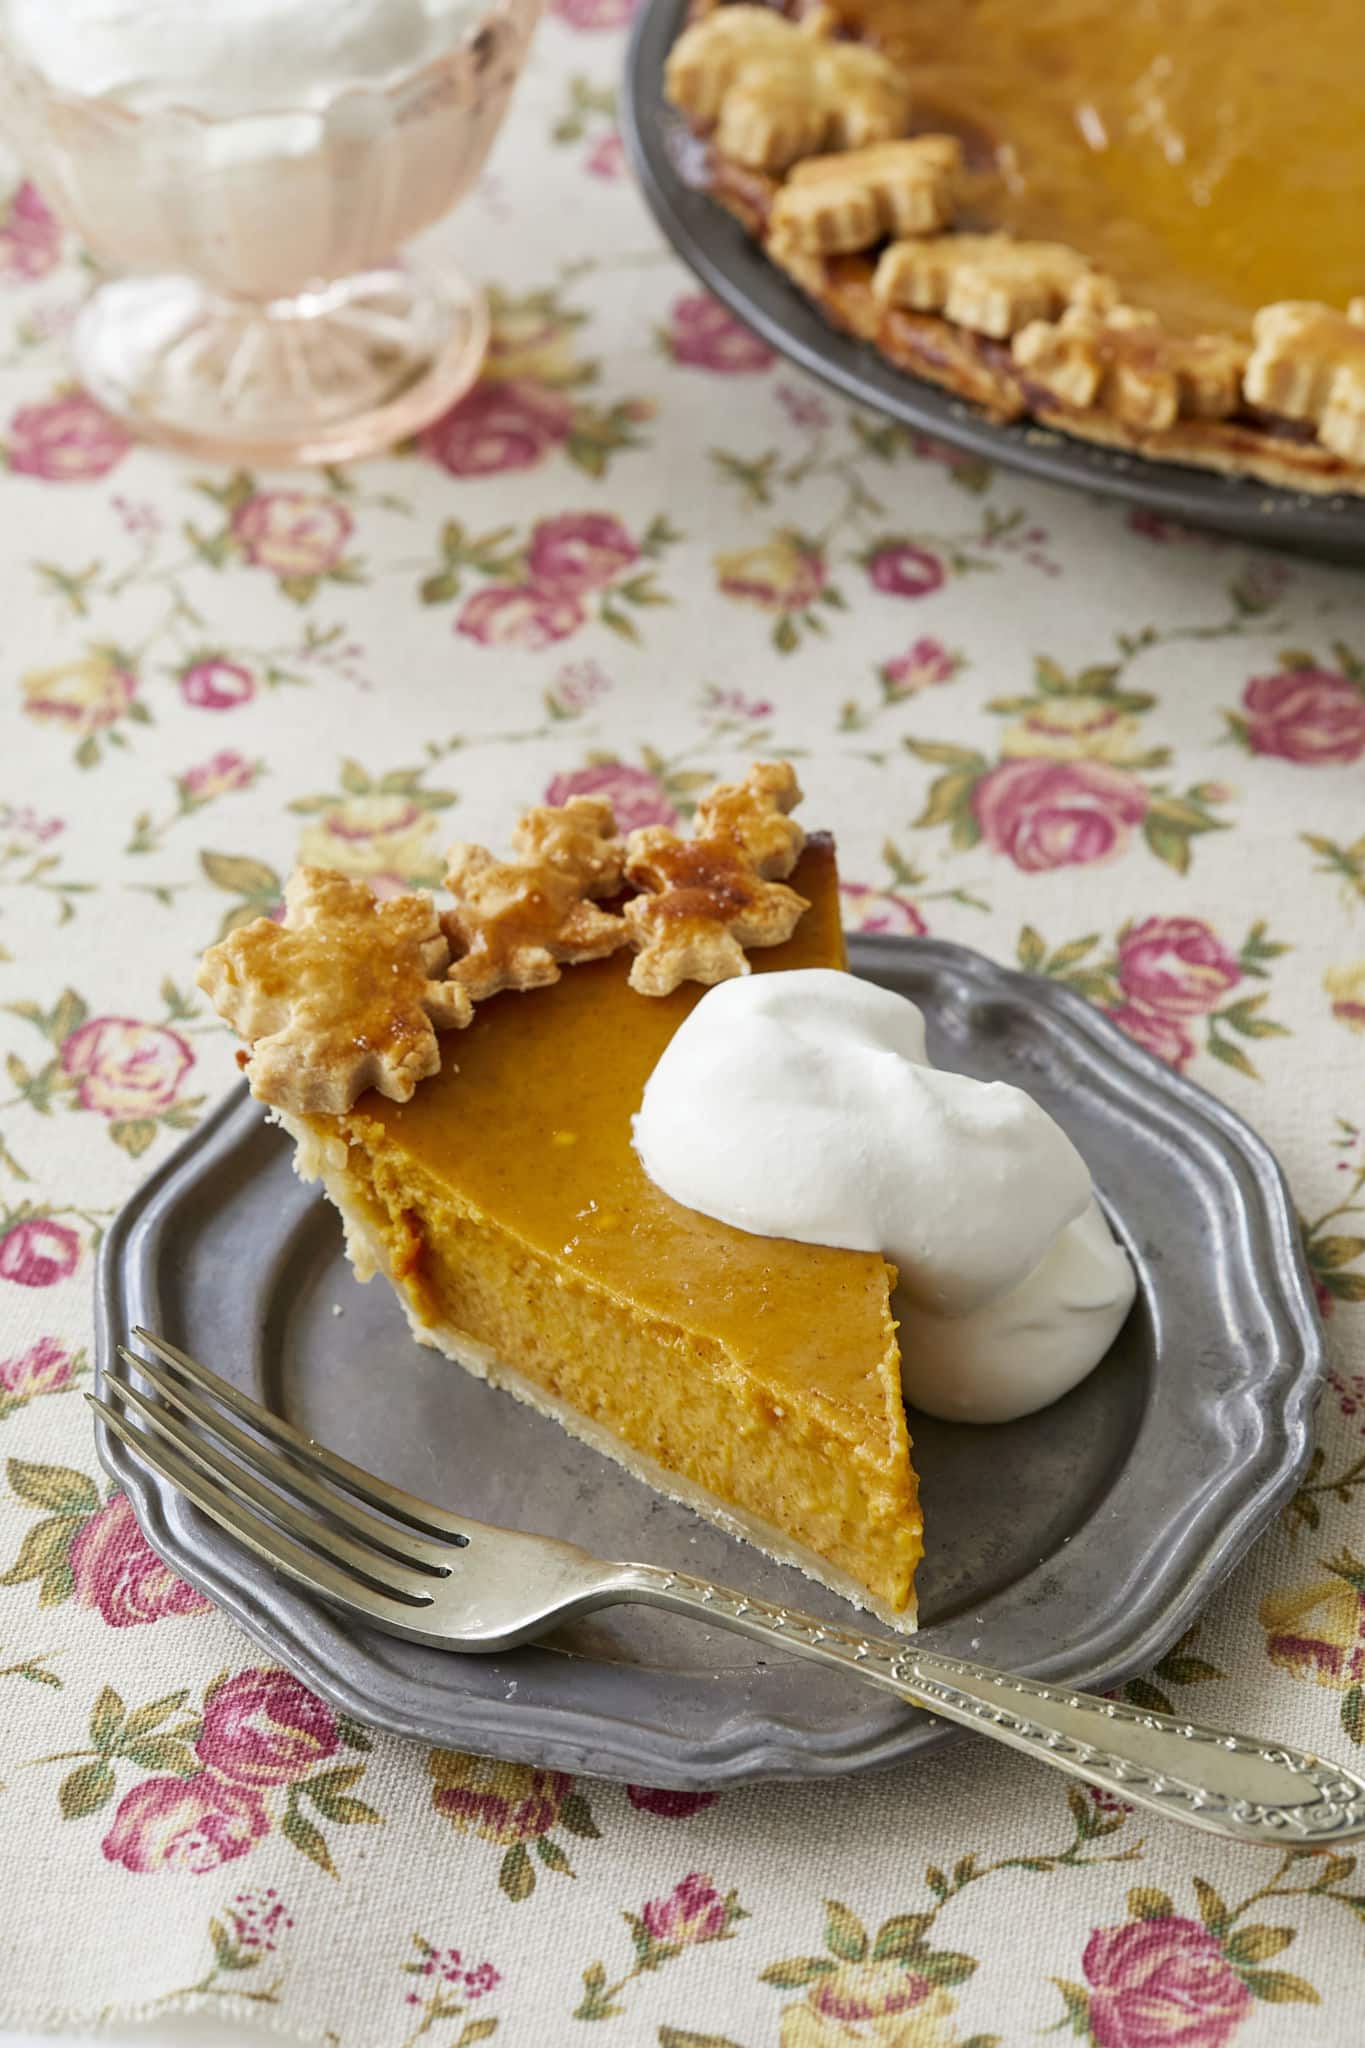 A close-up image of a slice of traditional pumpkin pie shows the silky custard center and crispy homemade pie crust.